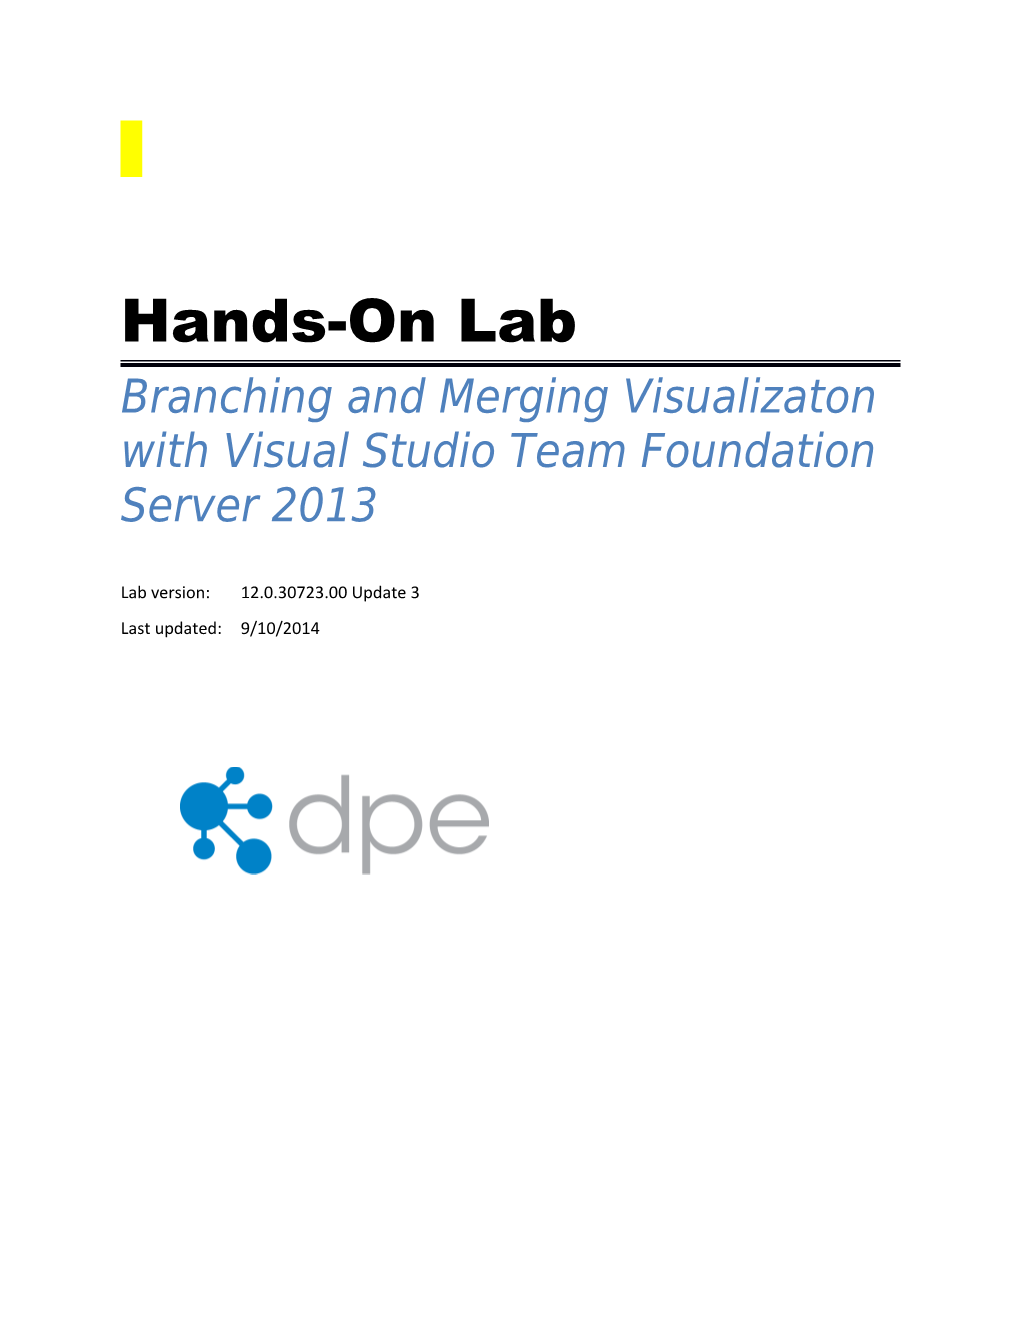 Branching and Merging Visualizaton with Visual Studio Team Foundation Server 2013